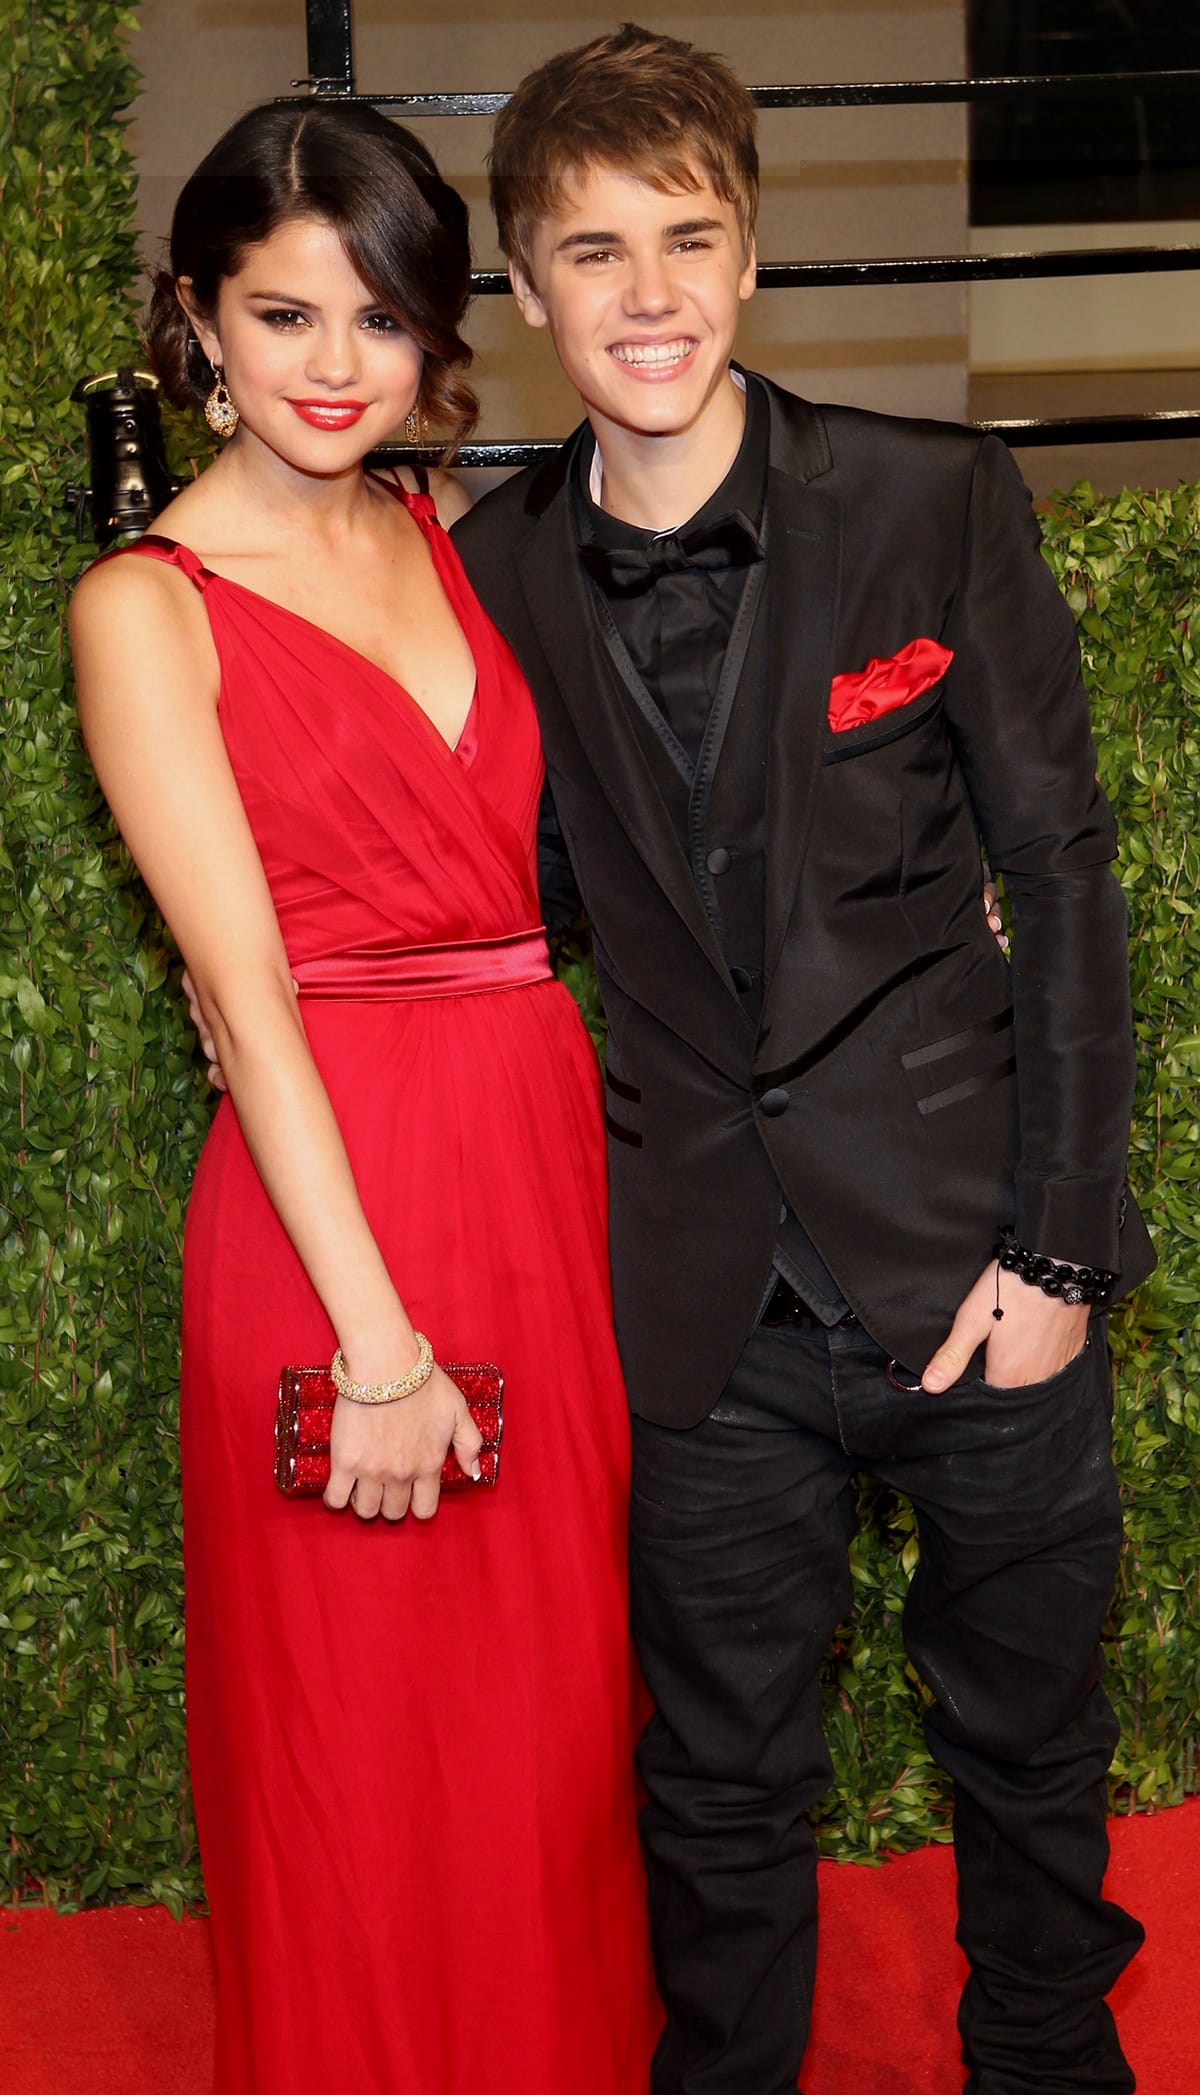 Selena Gomez and Justin Bieber looked almost the same height at the 2011 Vanity Fair Oscar Party